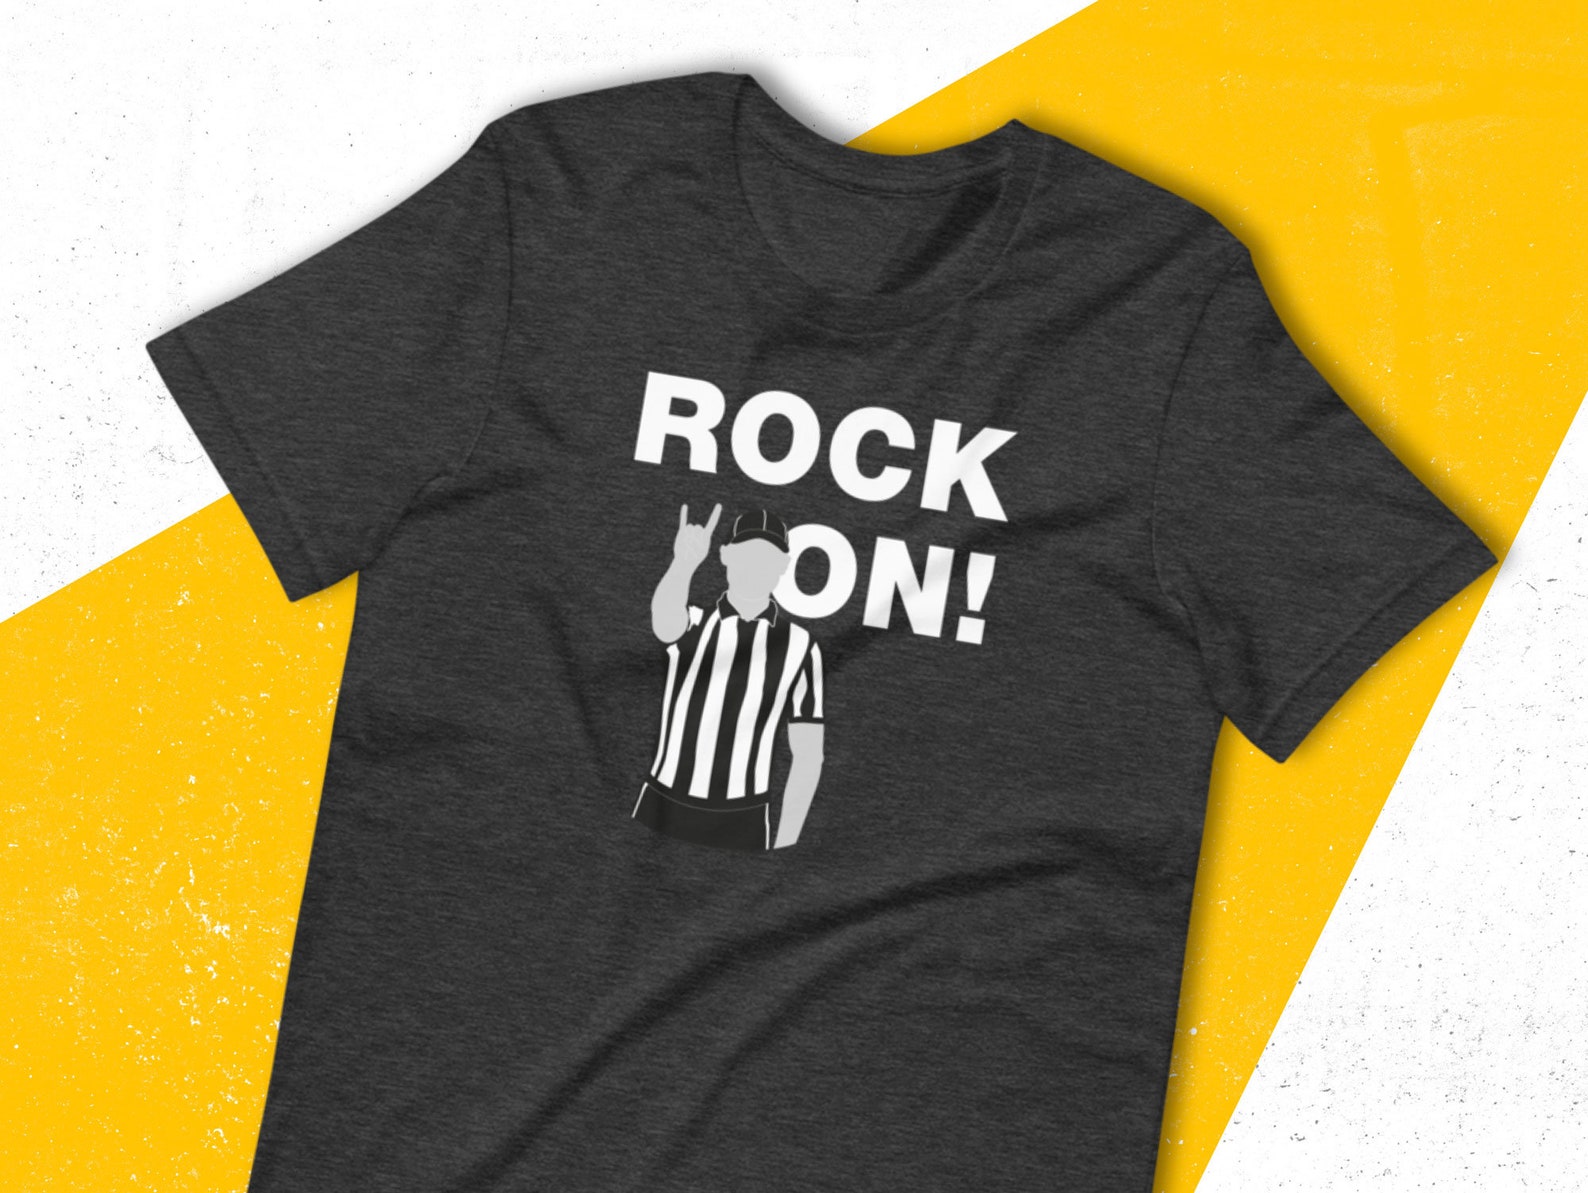 Mock up of unisex shirt saying 'Rock on' with referee on it